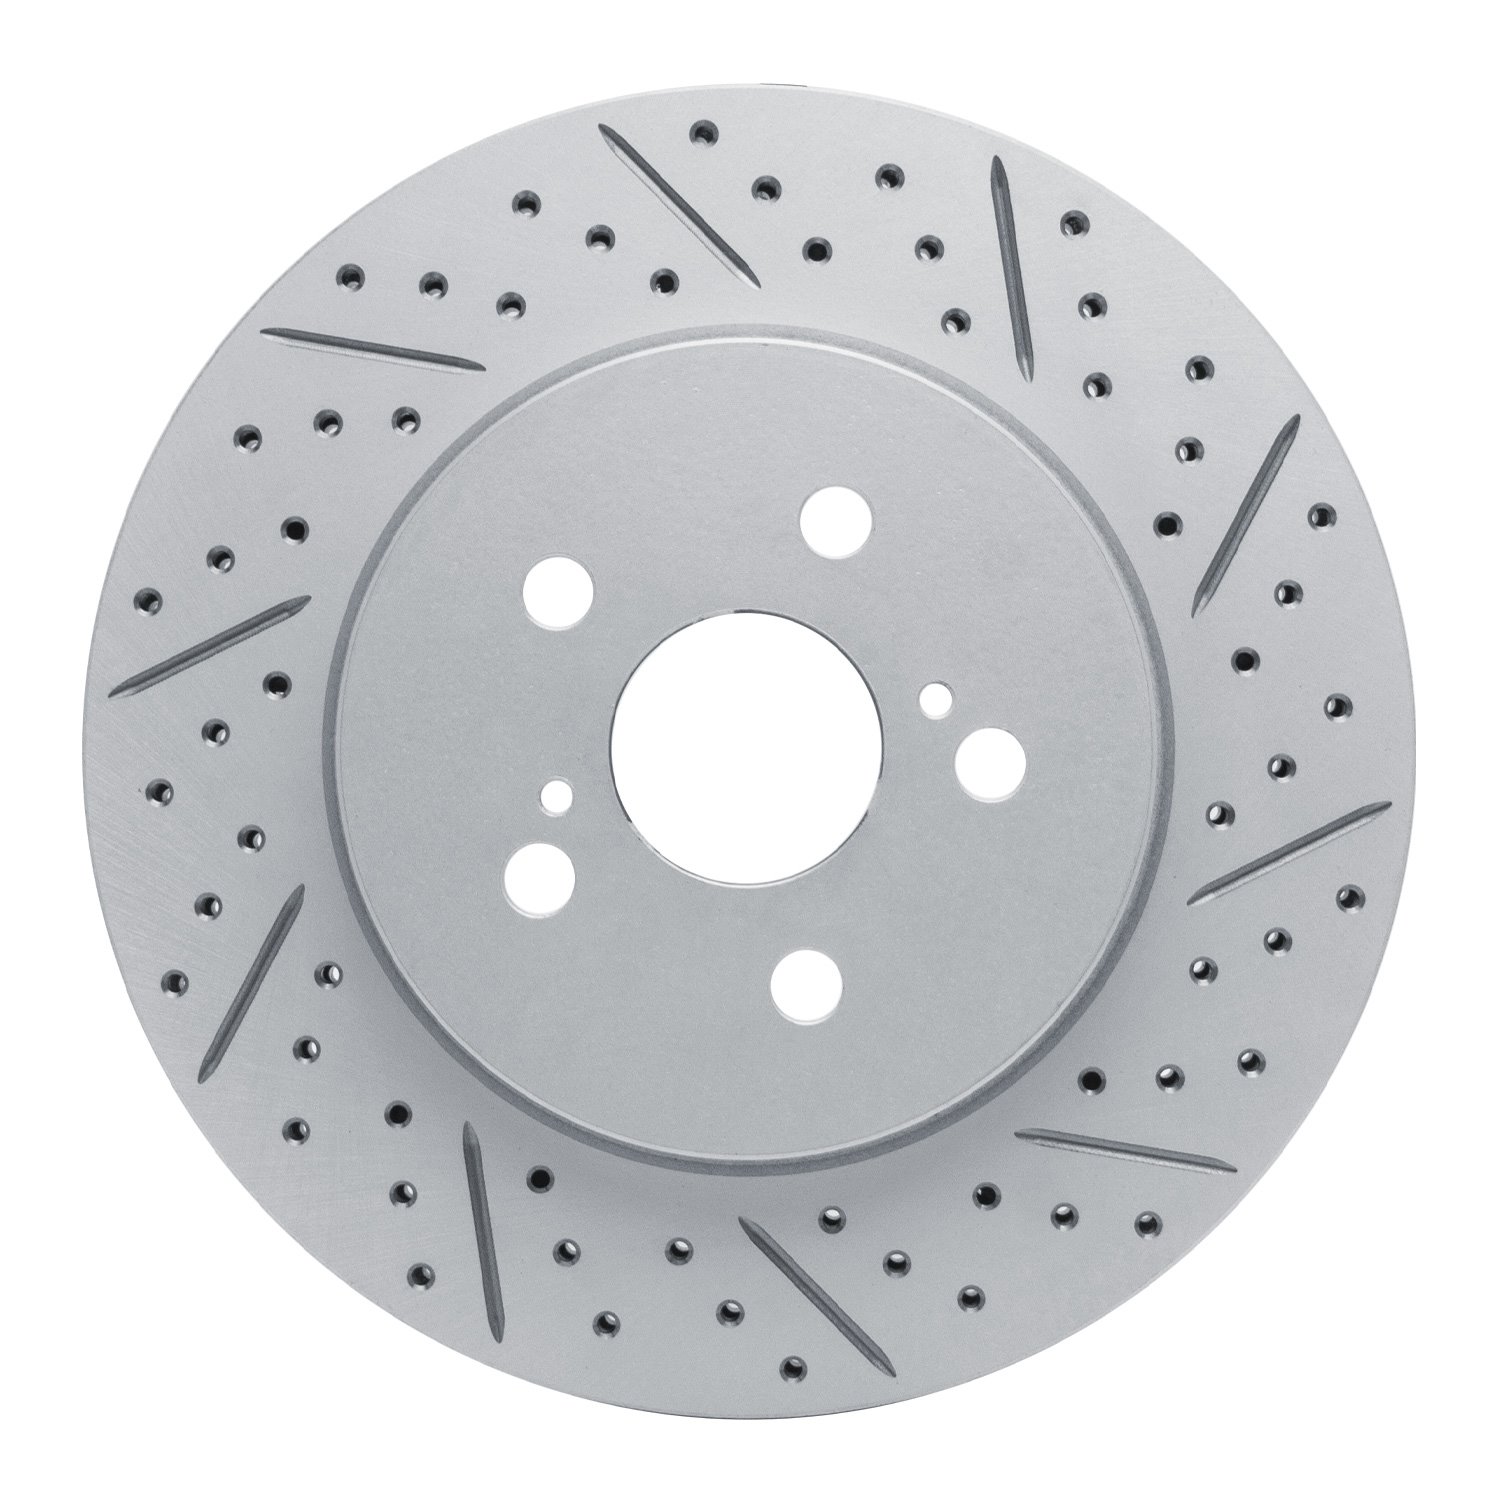 830-76155R Geoperformance Drilled/Slotted Brake Rotor, Fits Select Lexus/Toyota/Scion, Position: Front Right